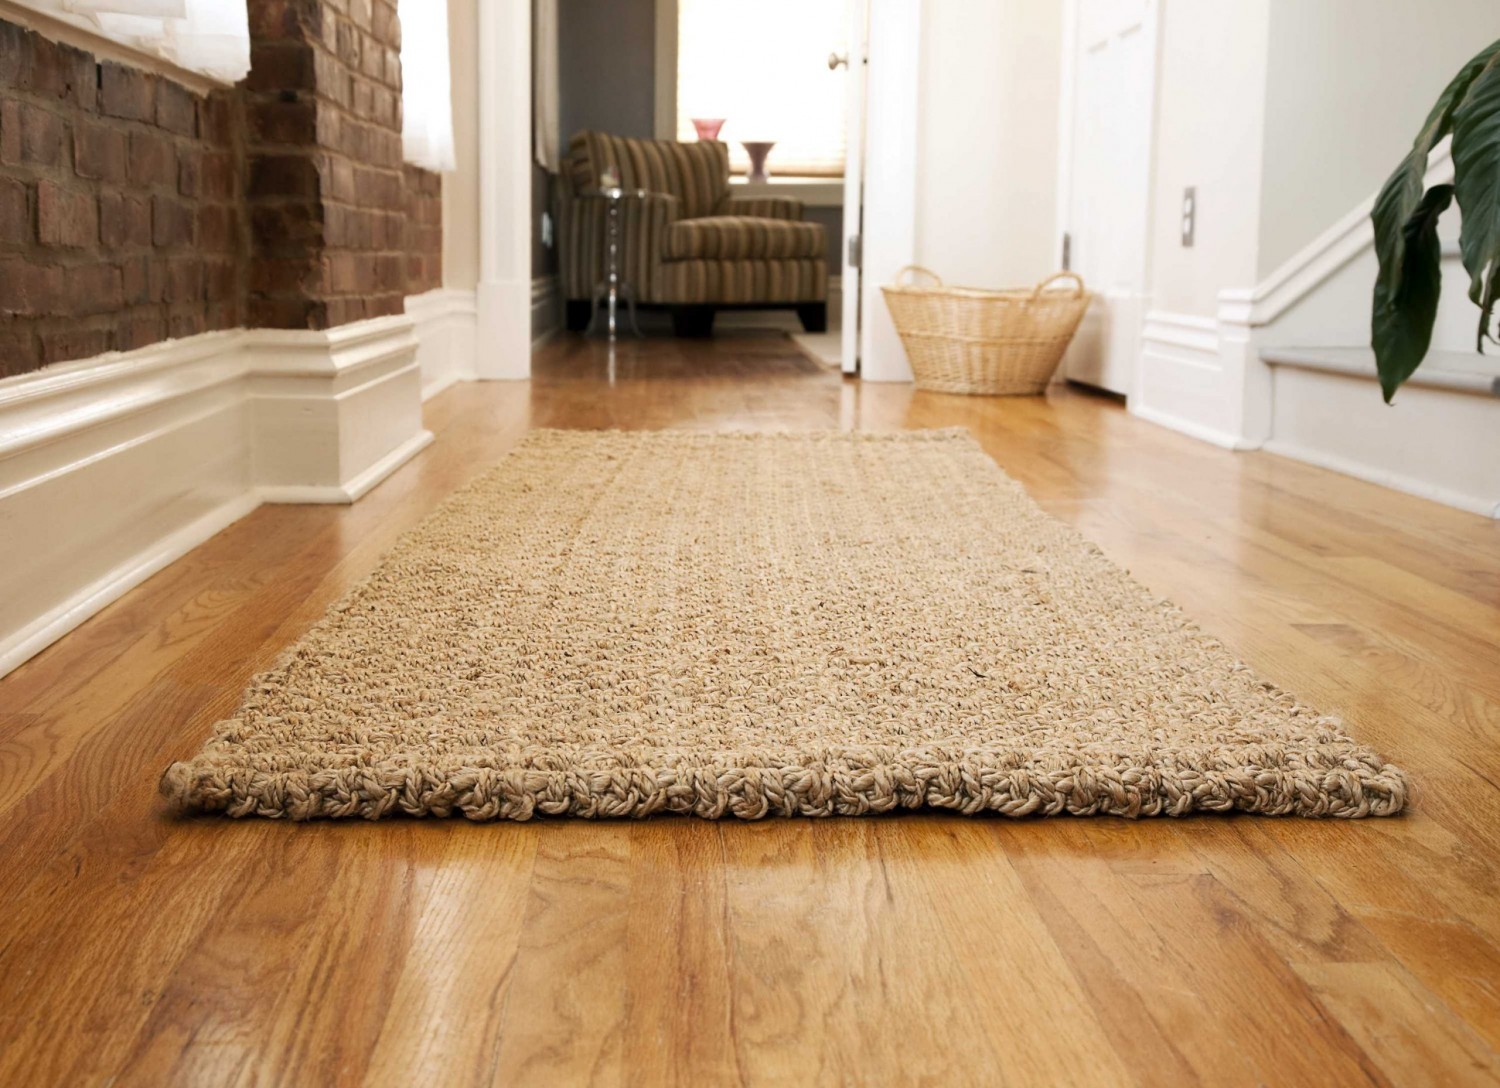 Best Rugs for Hardwood Floors: Types of Rugs for Better Protection (2022)